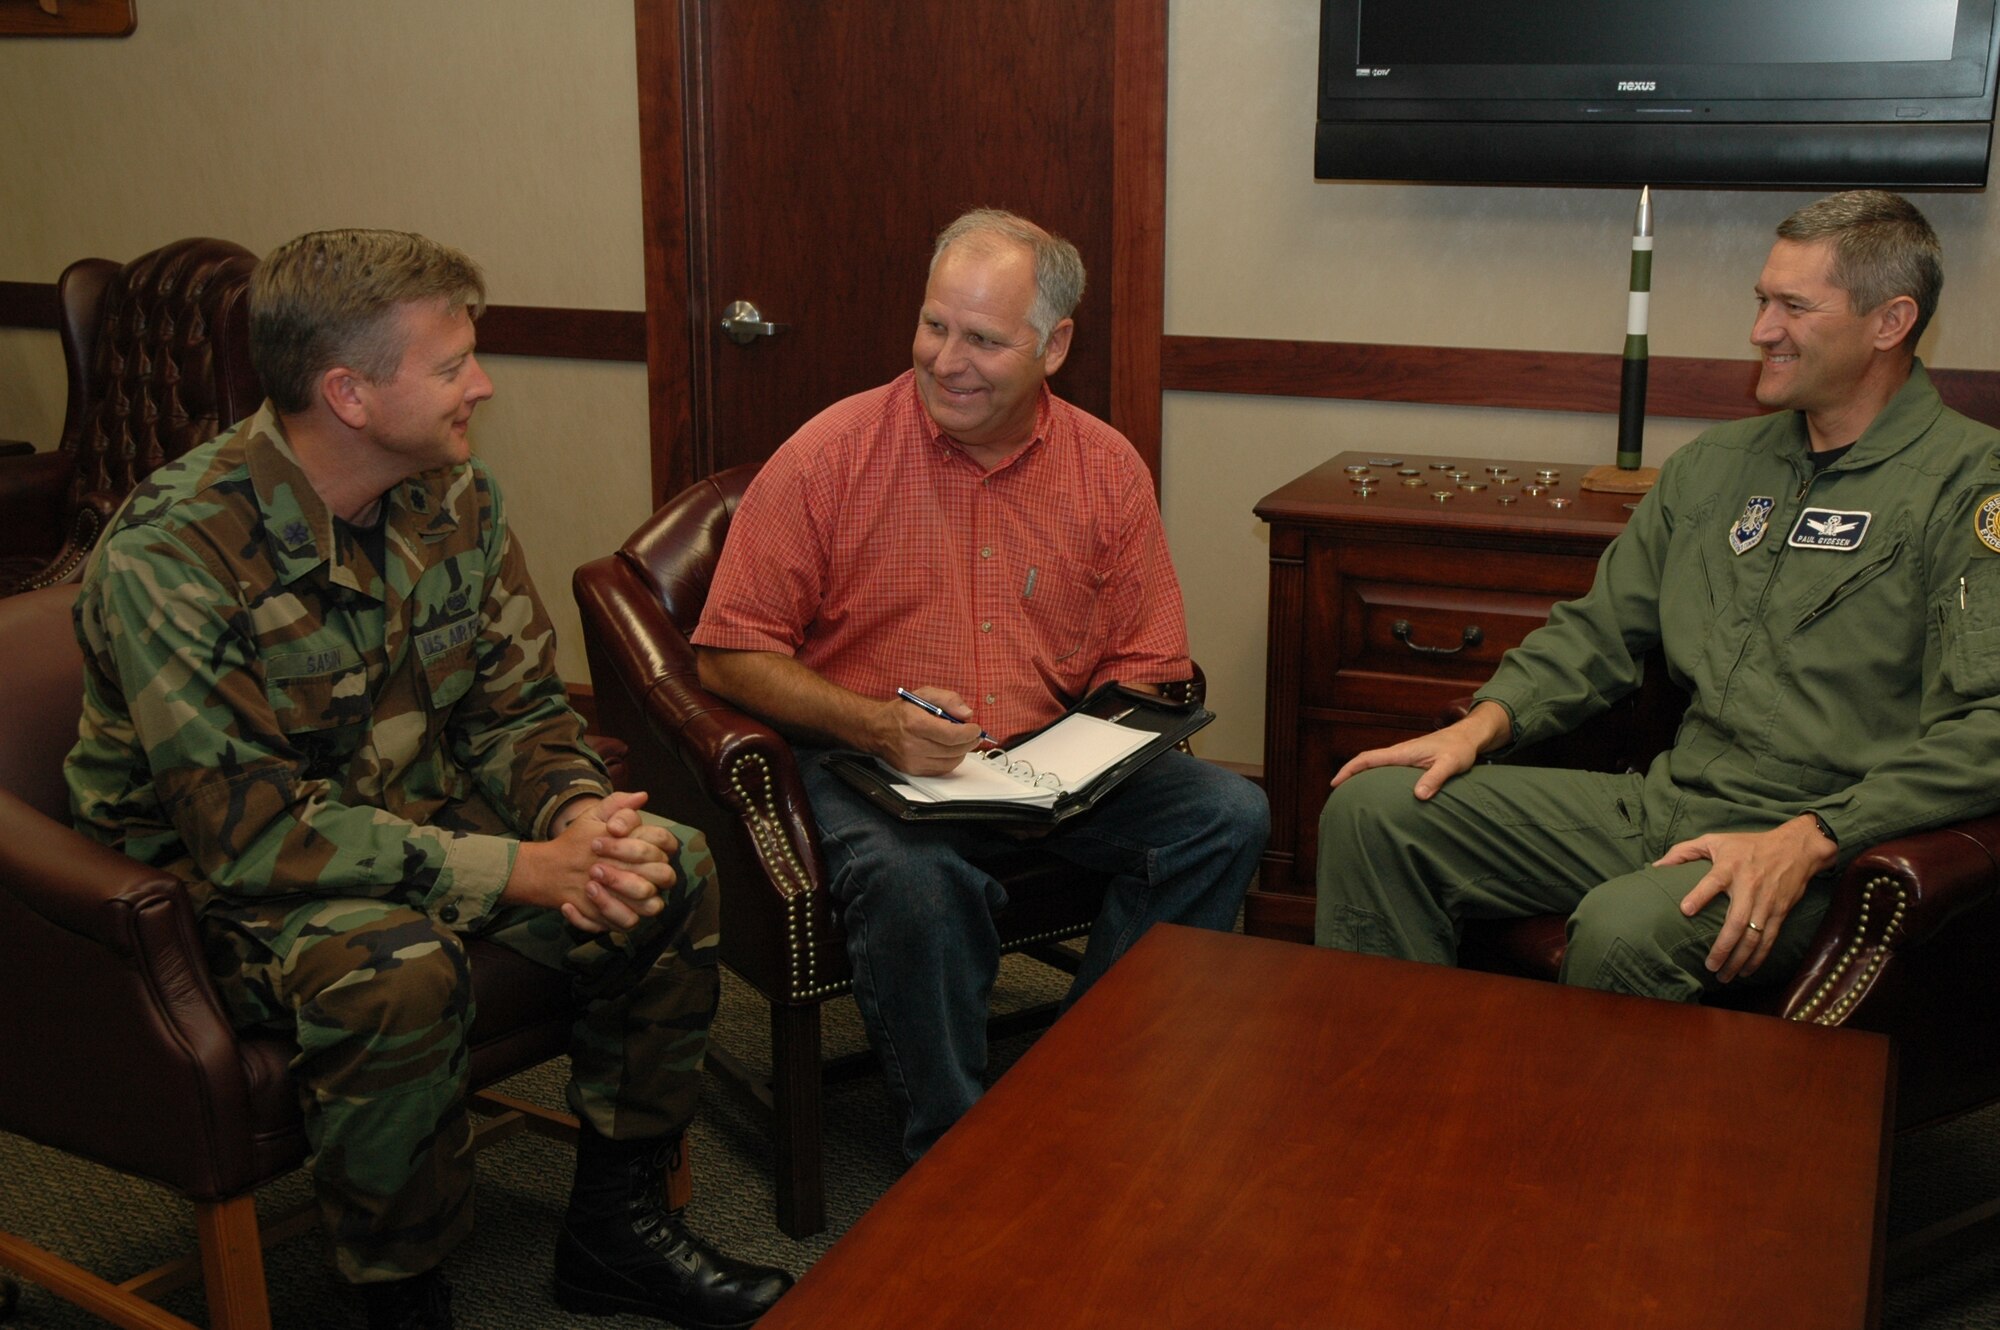 Col. Paul Gydesen, 341st Space Wing vice commander, right, discusses the Strategic Arms Reduction Treaty with Mike Bailey, 341st Space Wing chief of treaties compliance, center, and Lt. Col. Sean Sabin, 341st Space Wing staff judge advocate, left.